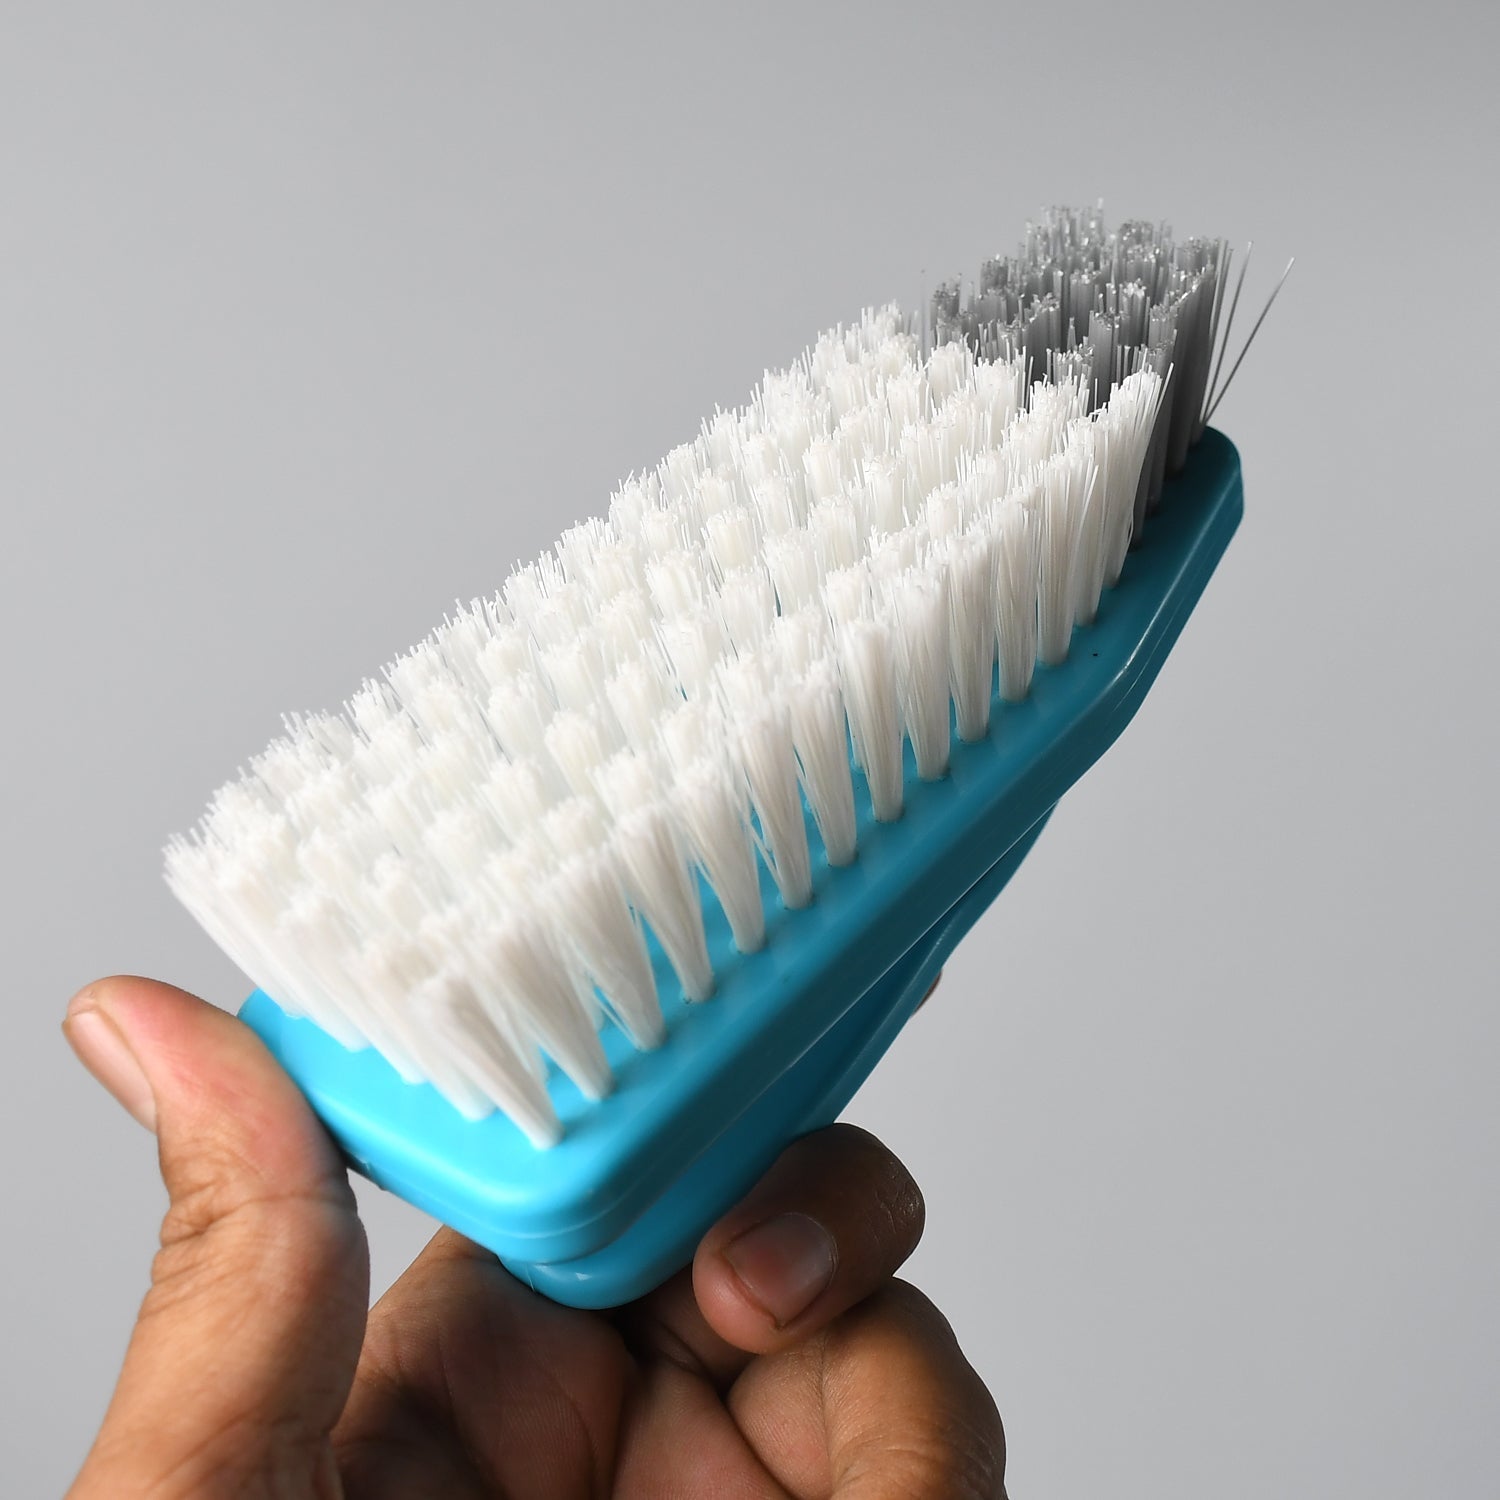 7527 MULTIPURPOSE DURABLE CLEANING BRUSH WITH HANDLE FOR CLOTHES LAUNDRY FLOOR TILES AT HOME KITCHEN SINK, WET AND DRY WASH CLOTH SPOTTING WASHING SCRUBBING BRUSH. JK Trends